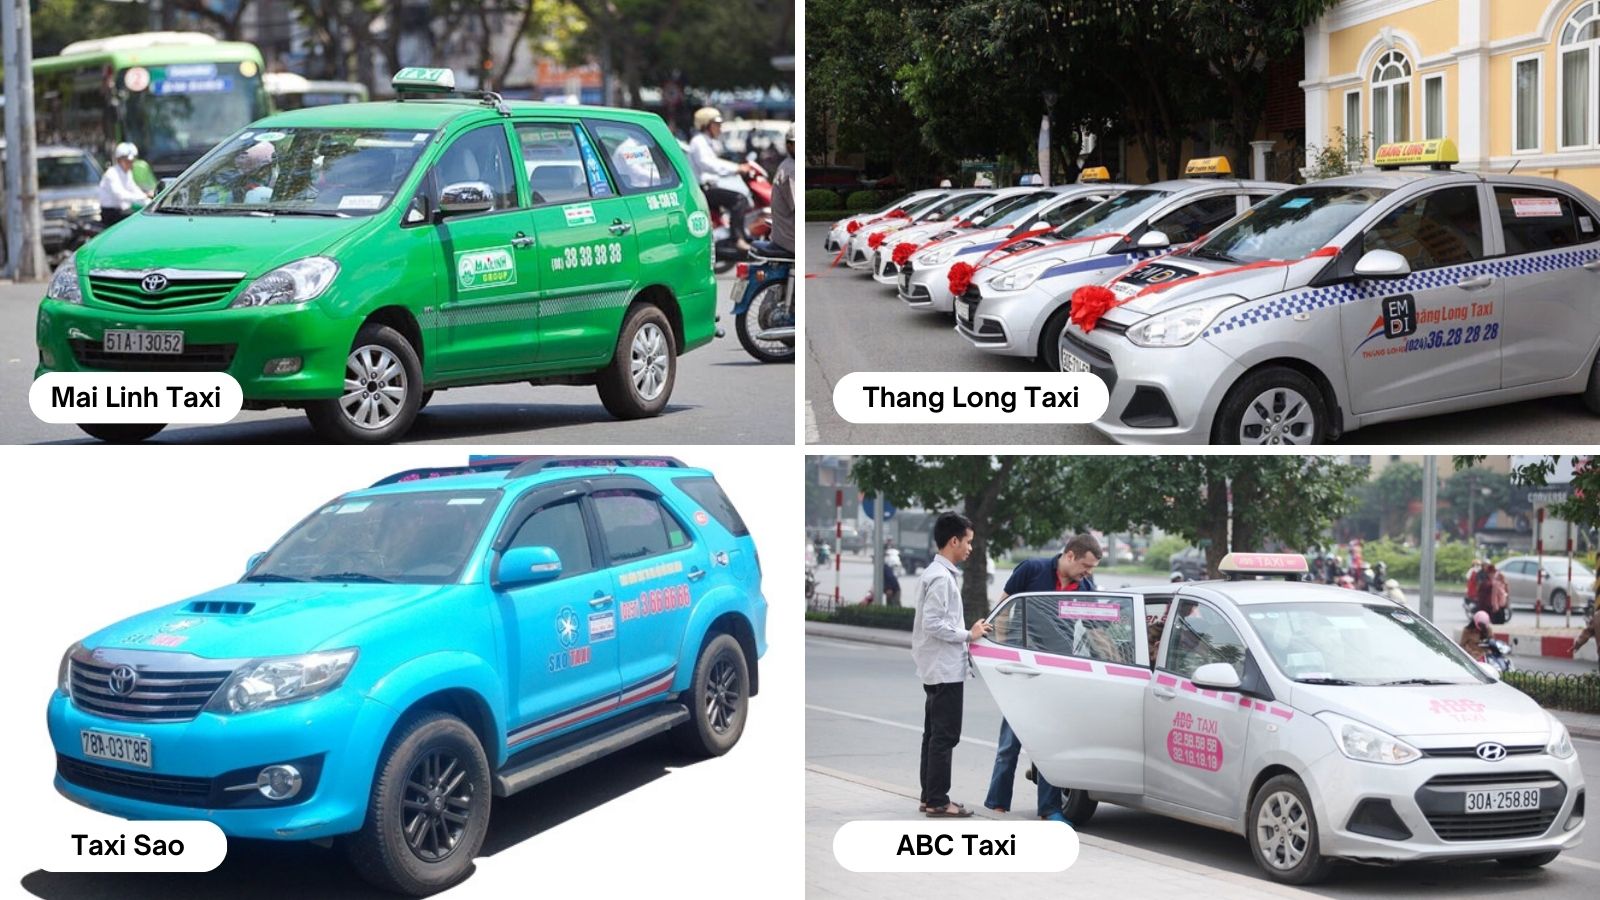 Embark On The Friendly Ride With Traditional Taxi